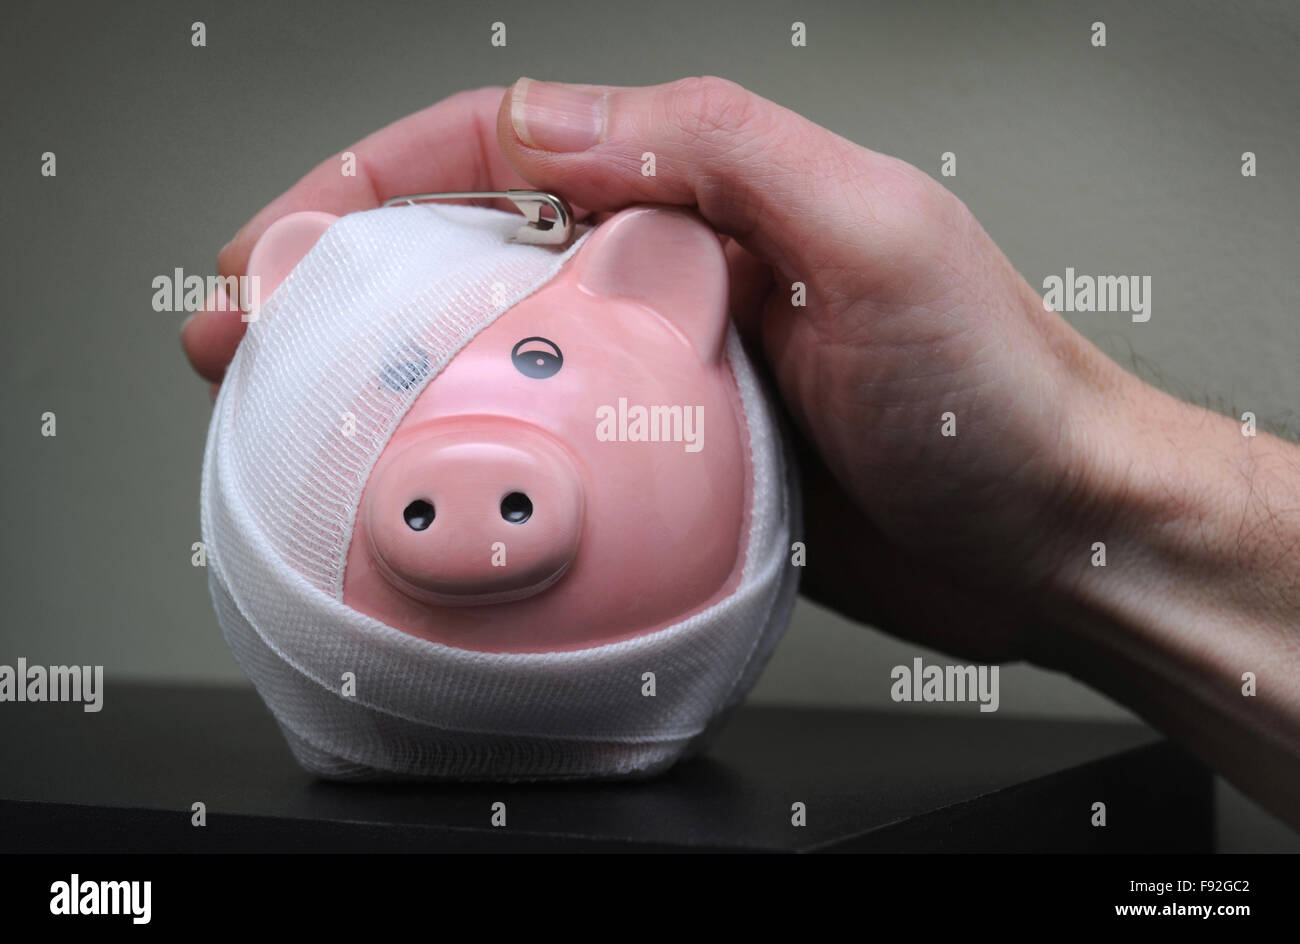 BANDAGED PIGGYBANK WITH MANS HAND RE INVESTMENTS PIGGY BANK PRIVATE PENSION COMPANY STATE PENSIONERS MORTGAGES SAVINGS MONEY UK Stock Photo